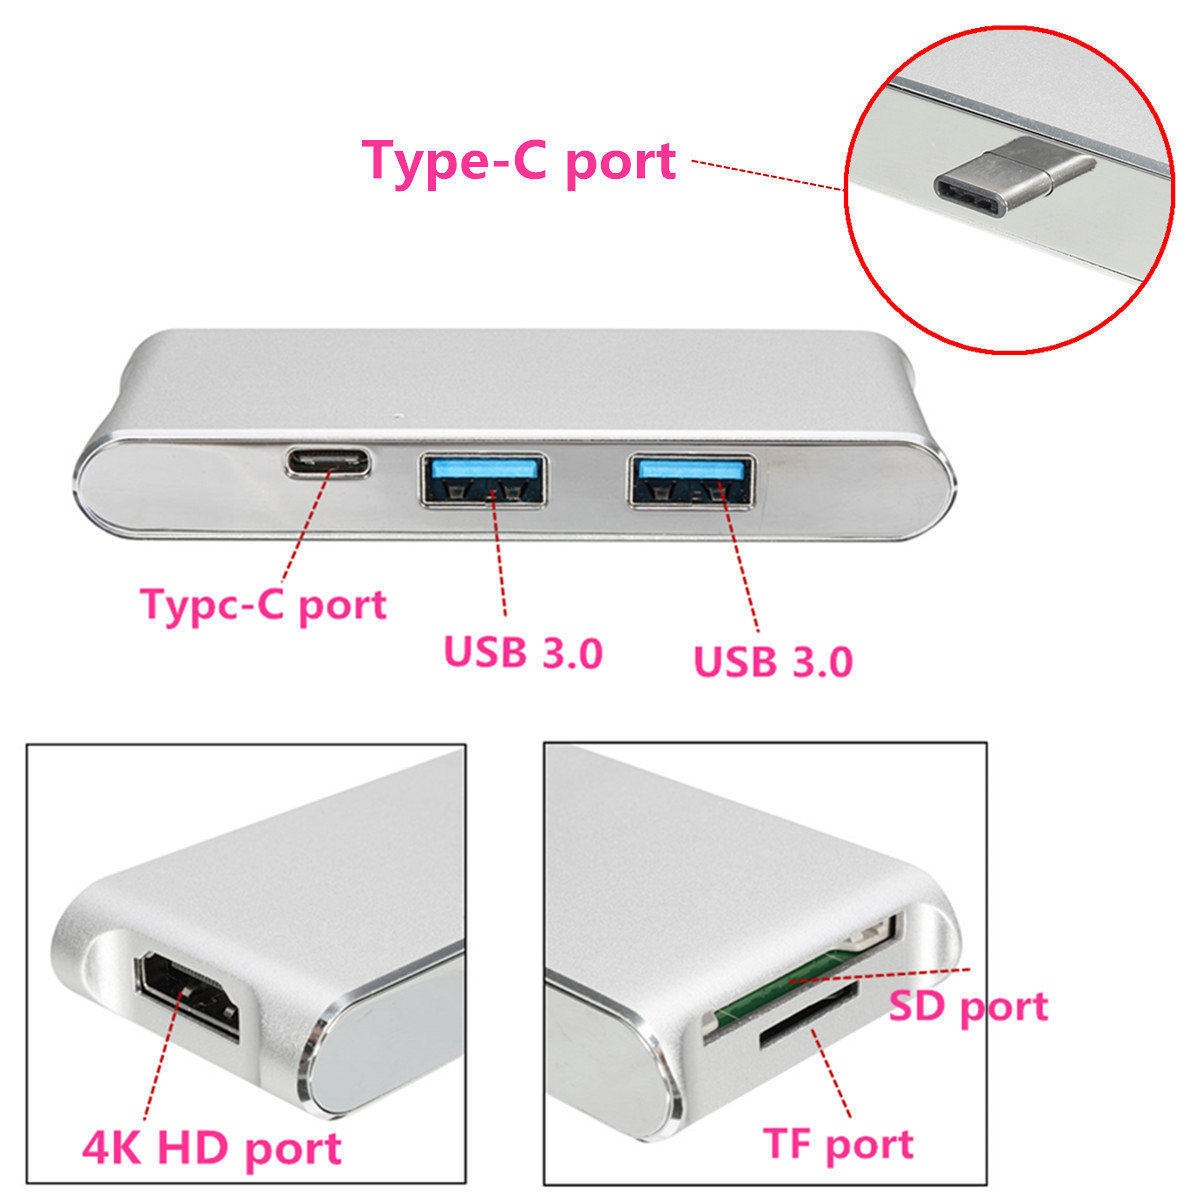 6 in 1 USB-C HUB with Type-C Power Delivery 4K Video HD Output Converter Alloy Card Reader